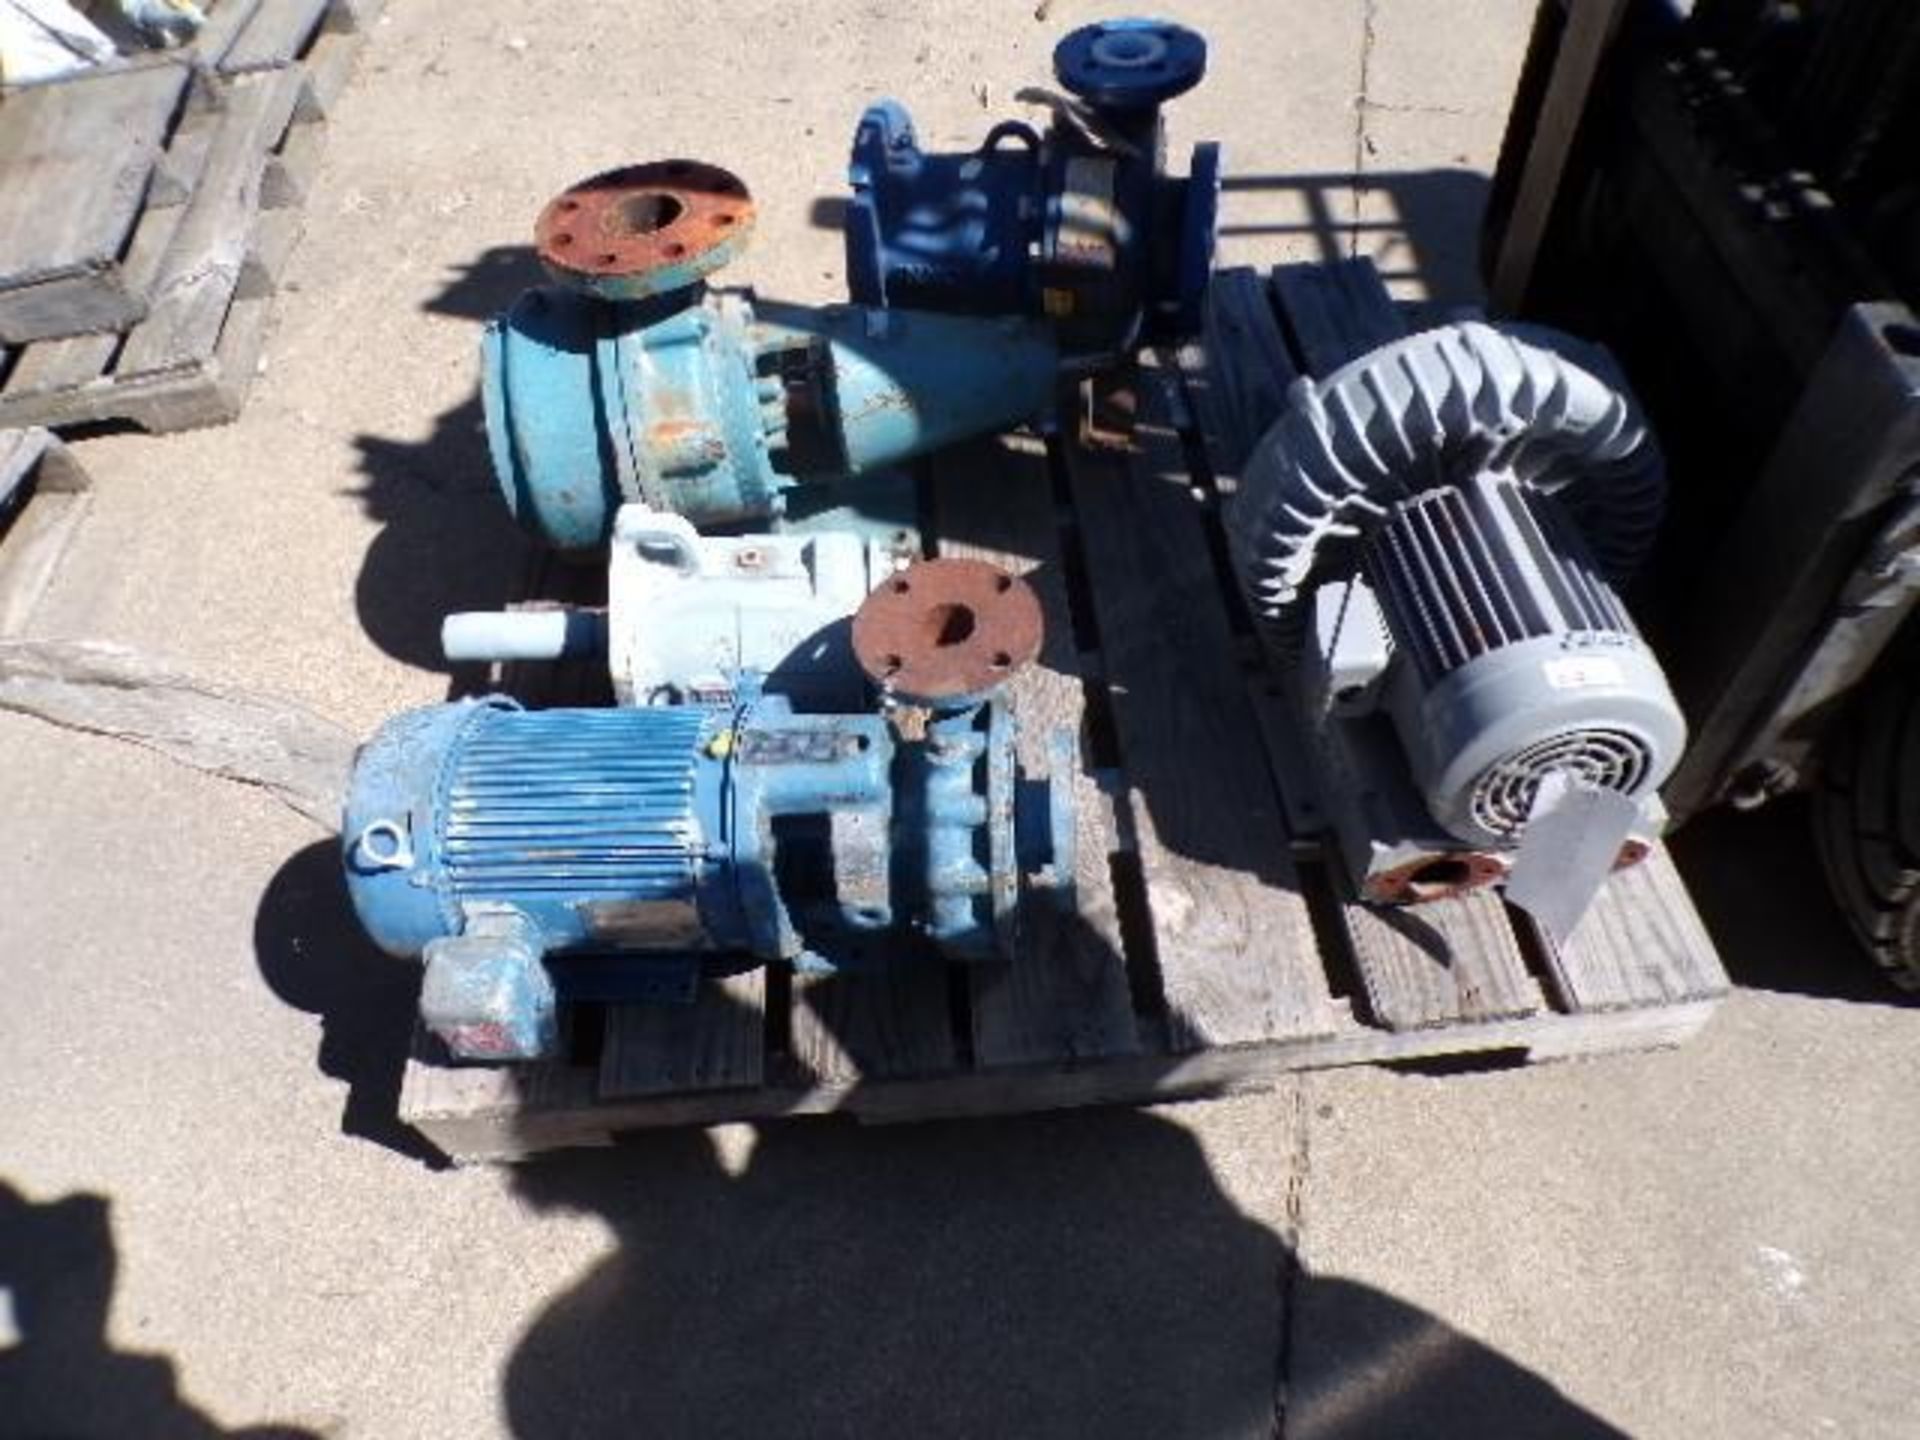 Ring Compressor, Gould 3755 2x2-7 Iron Pump/US 3 HP Motor, Durco Mark 3 Bearing Frame, Roth 3x4 Iron - Image 3 of 3